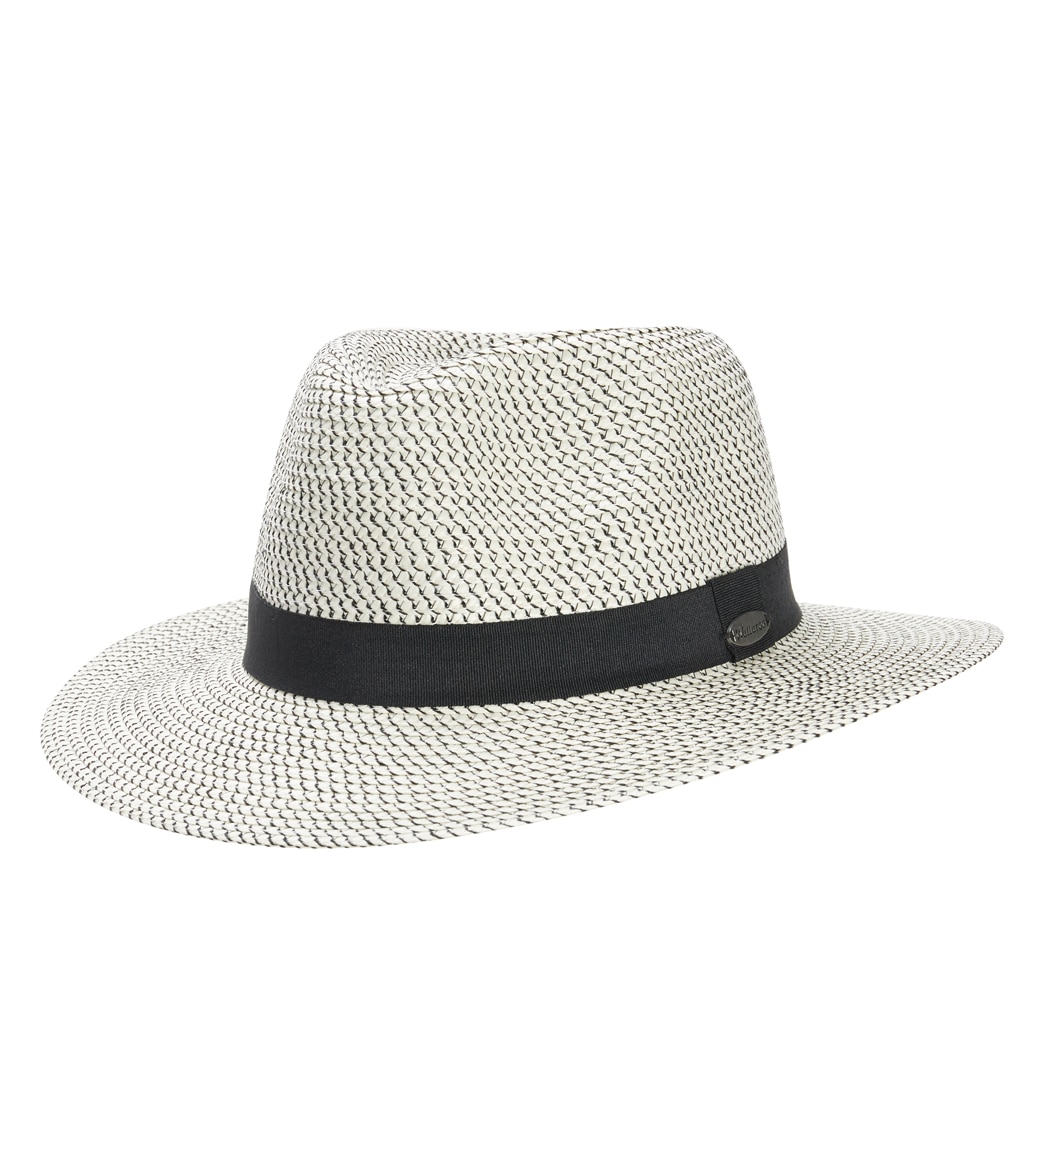 Wallaroo Women's Petite Charlie Fedora Hat - Ivory/Black One Size Polyester - Swimoutlet.com